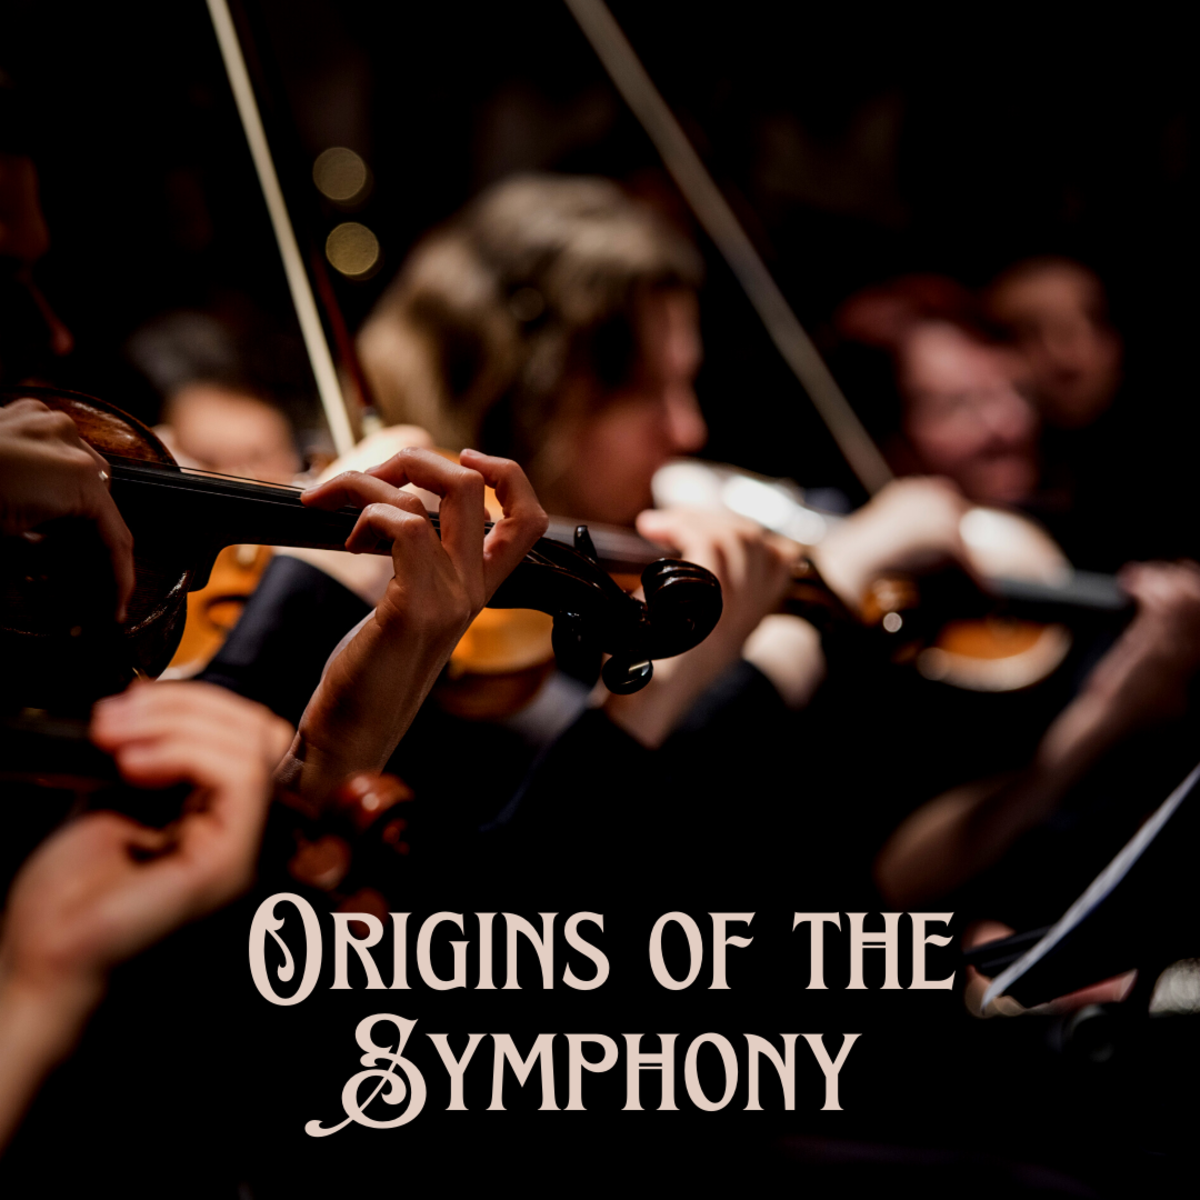 The Early History of the Symphony: Origins and Evolving Structure